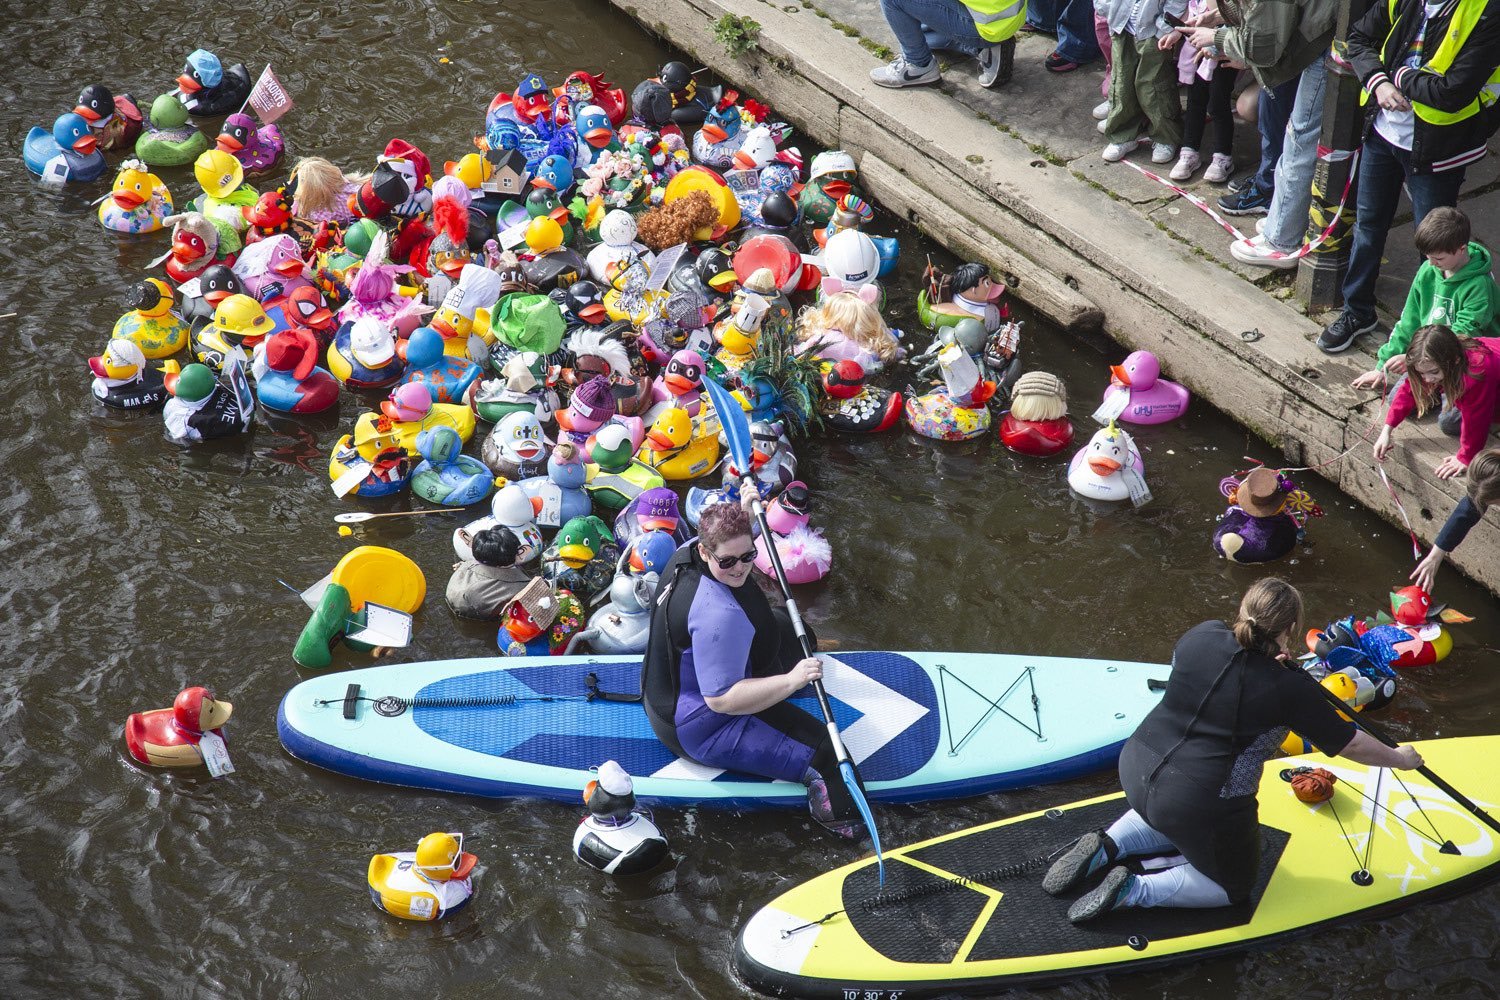 The Chester Duck Race saw a packed crowd at the River Dee on Saturday. Pictures: Danjeoryphoto.